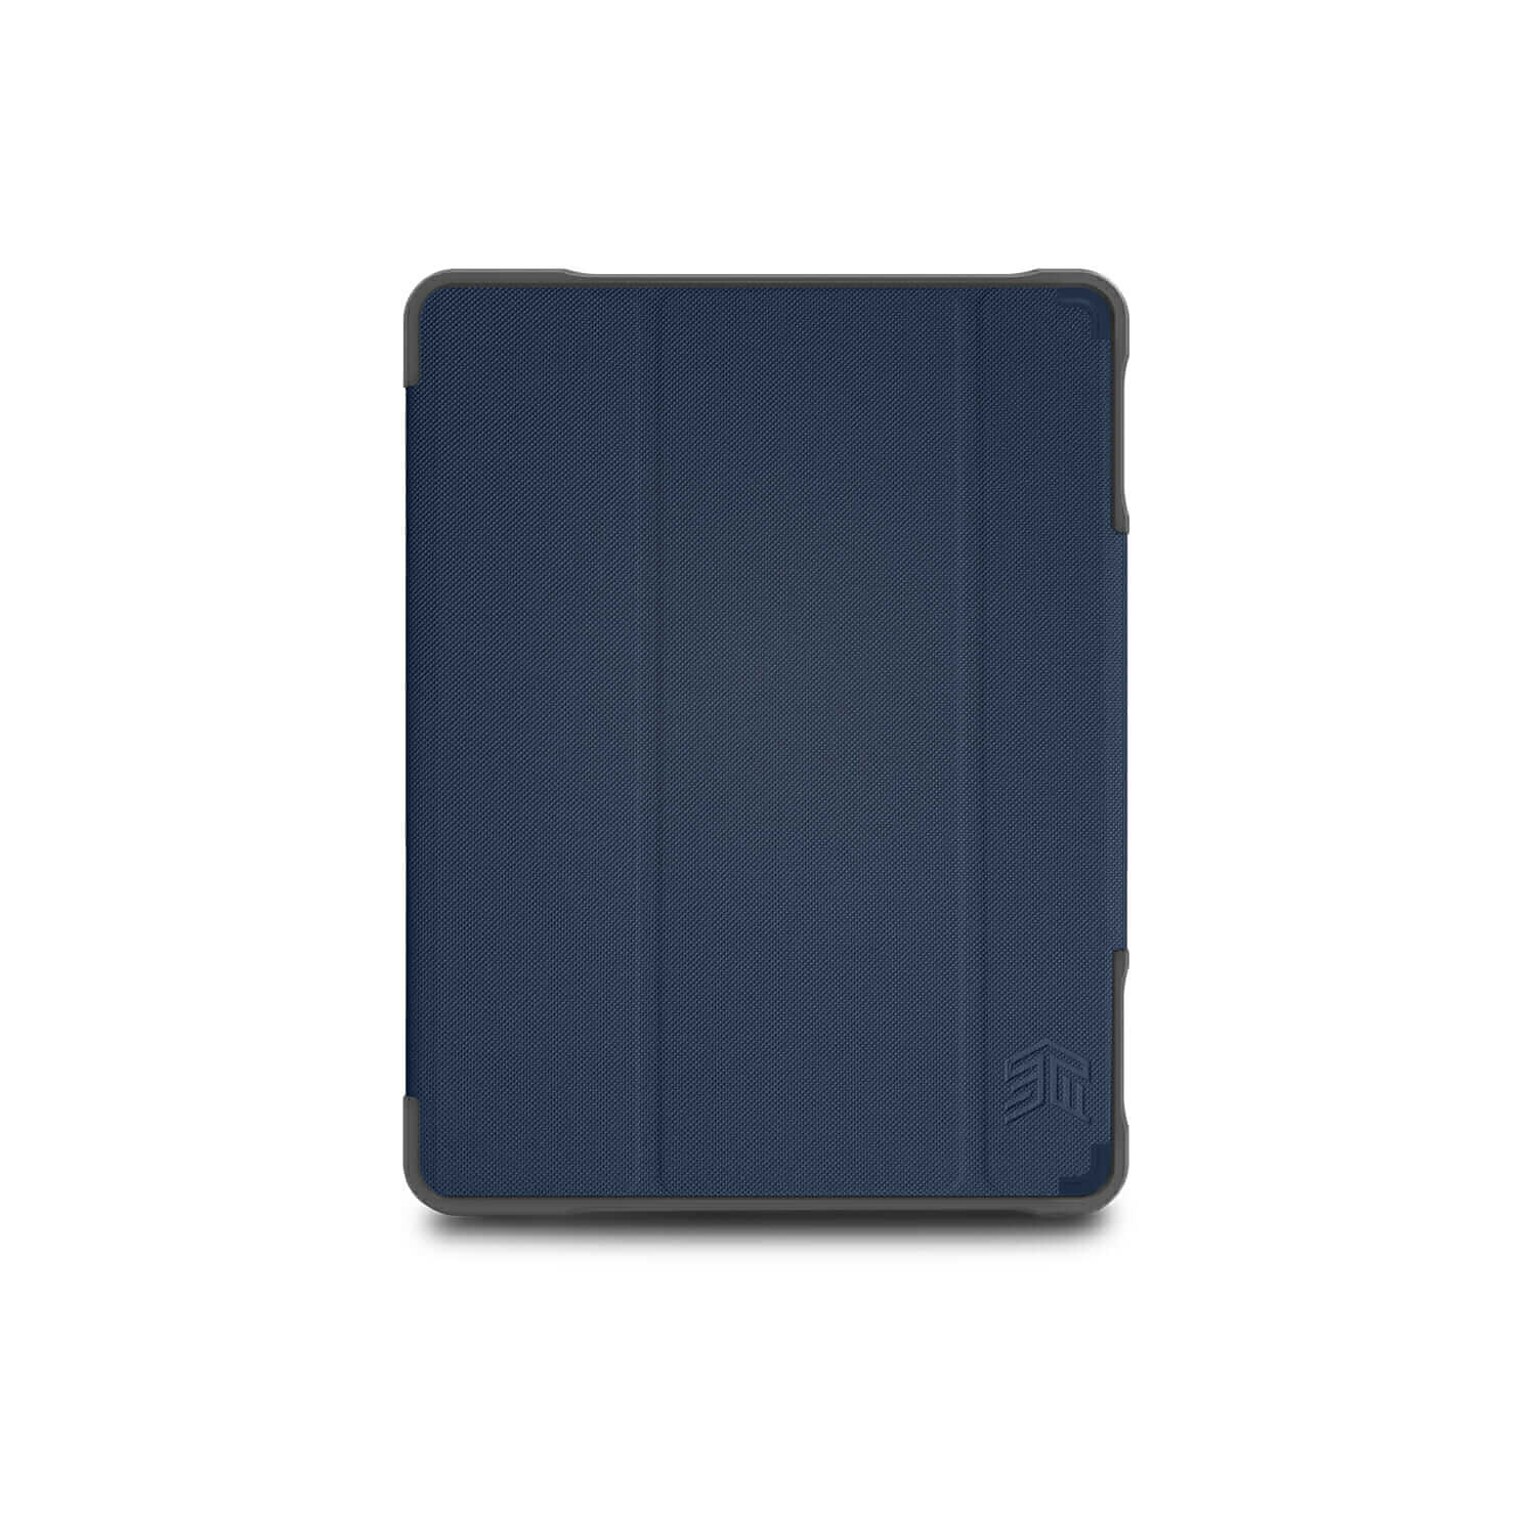 STM Dux Plus Duo TPU 10.2 Protective Case for iPad 7th/8th/9th Generation, Midnight Blue (STM-222-236JU-03)